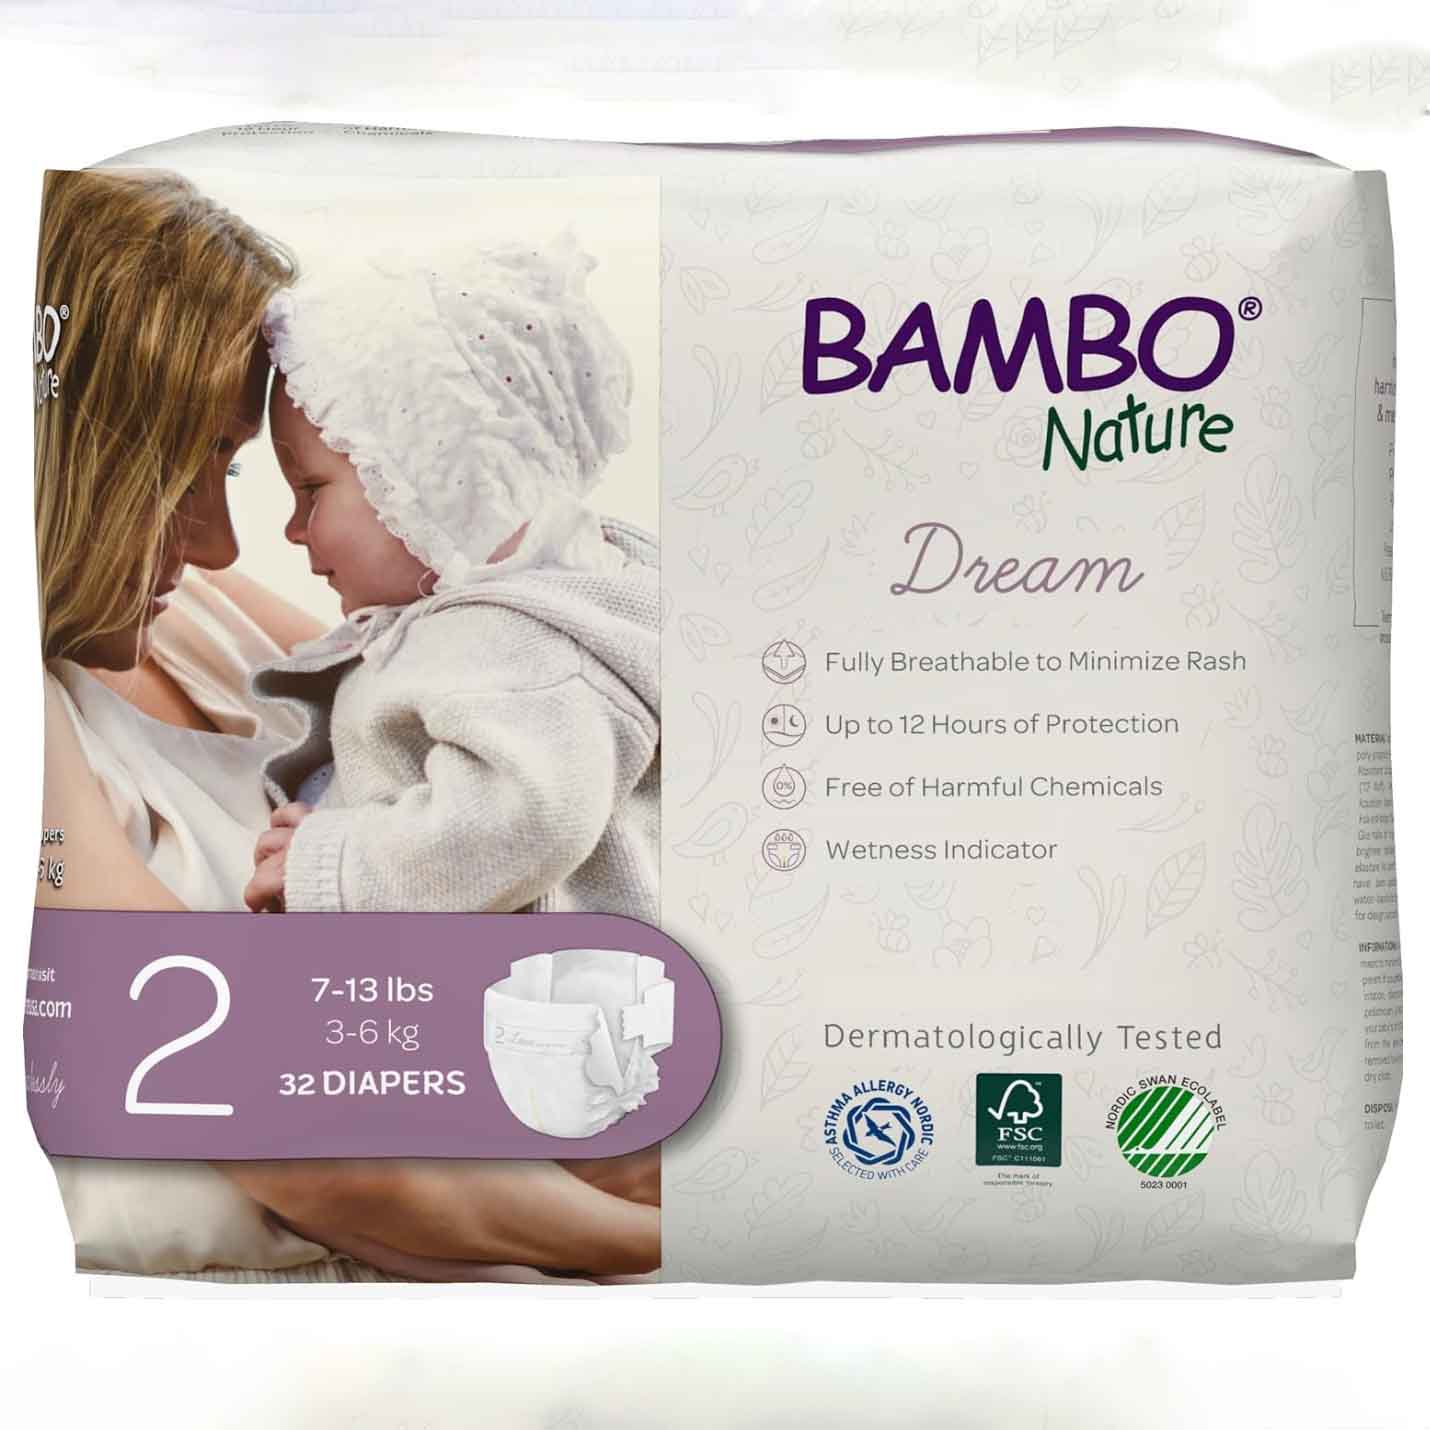 Diapers in cream and lavender packaging